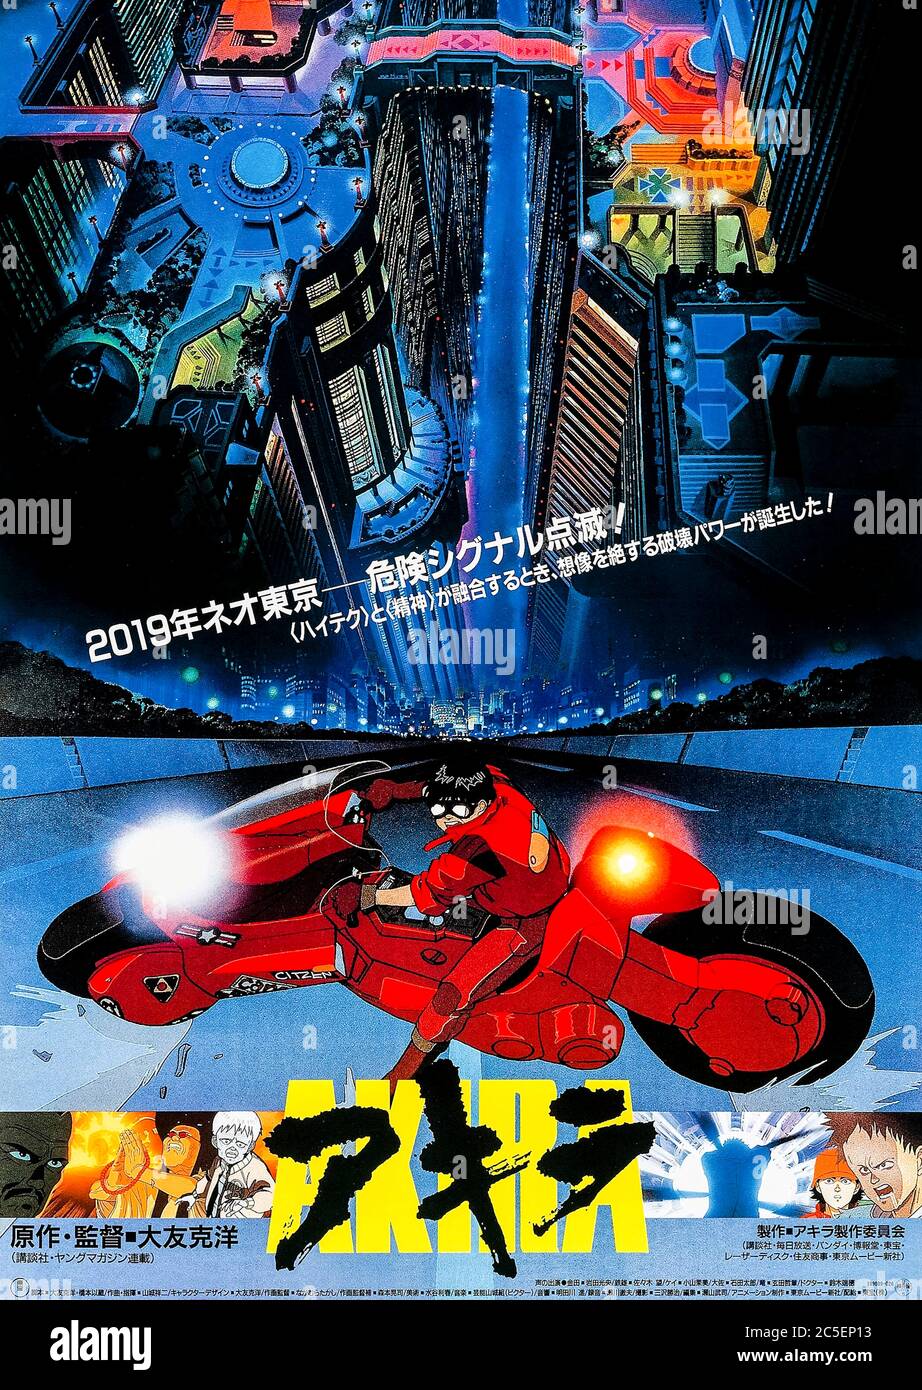 Taika Waititi Says Hes Still Keen On Making The Akira Movie I Dont  Wanna Give Up On That  THE RONIN